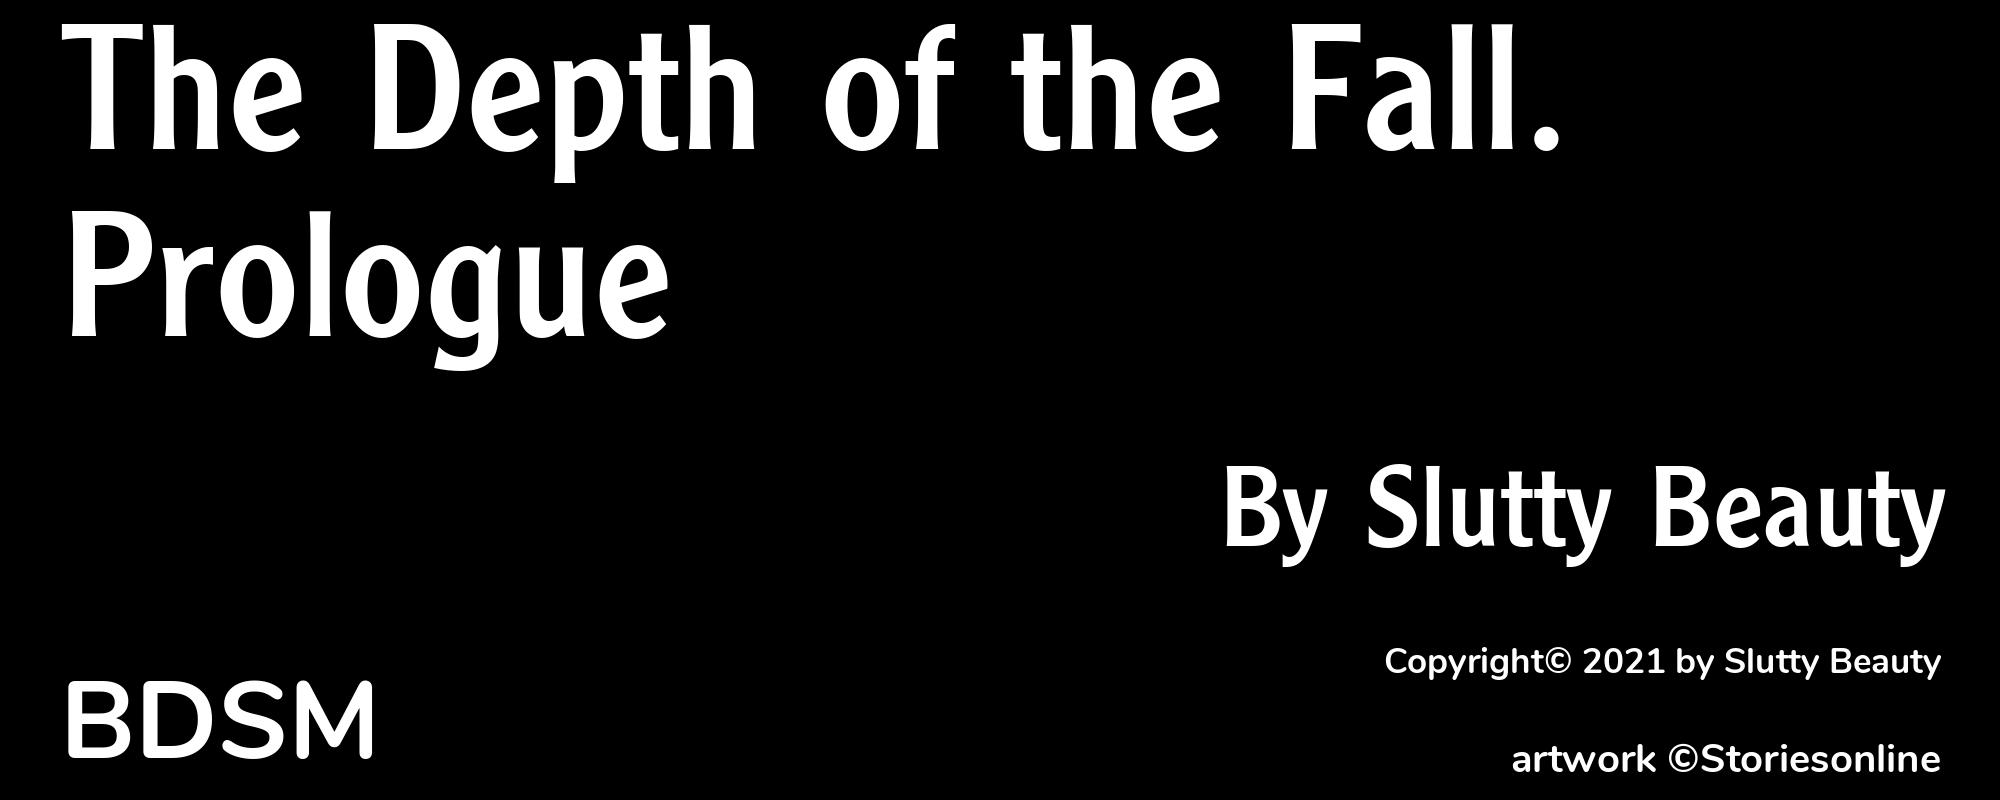 The Depth of the Fall. Prologue - Cover